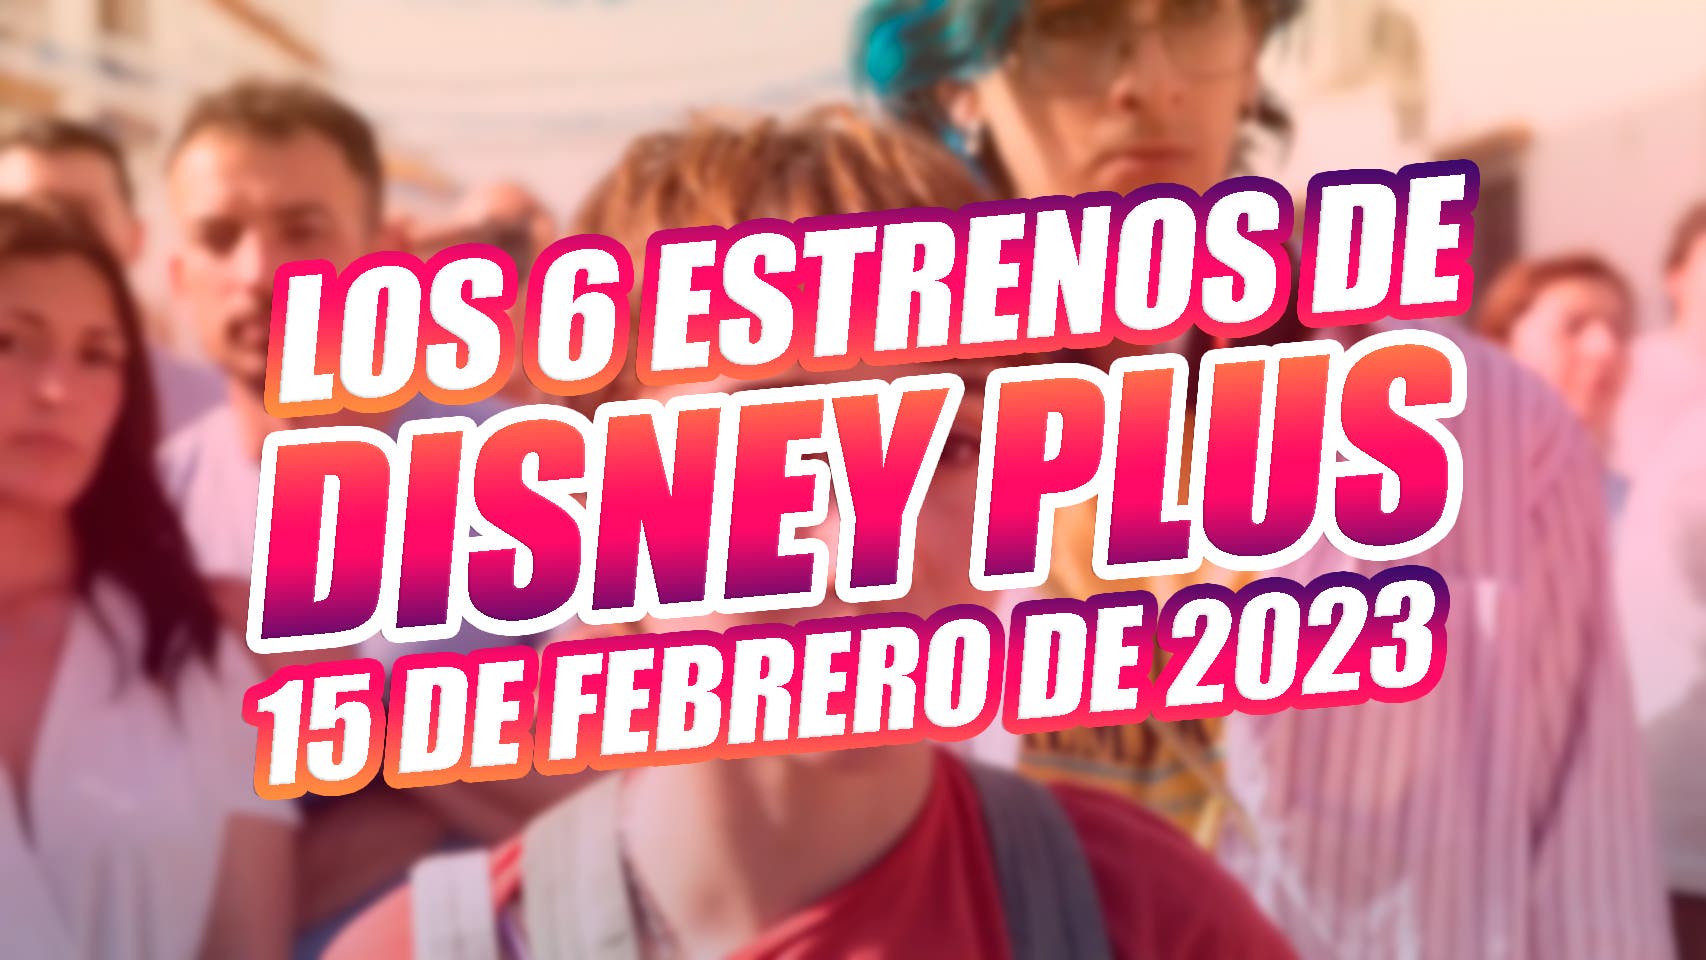 The 6 Disney Plus premieres arriving today on the streaming platform (February 15, 2023)